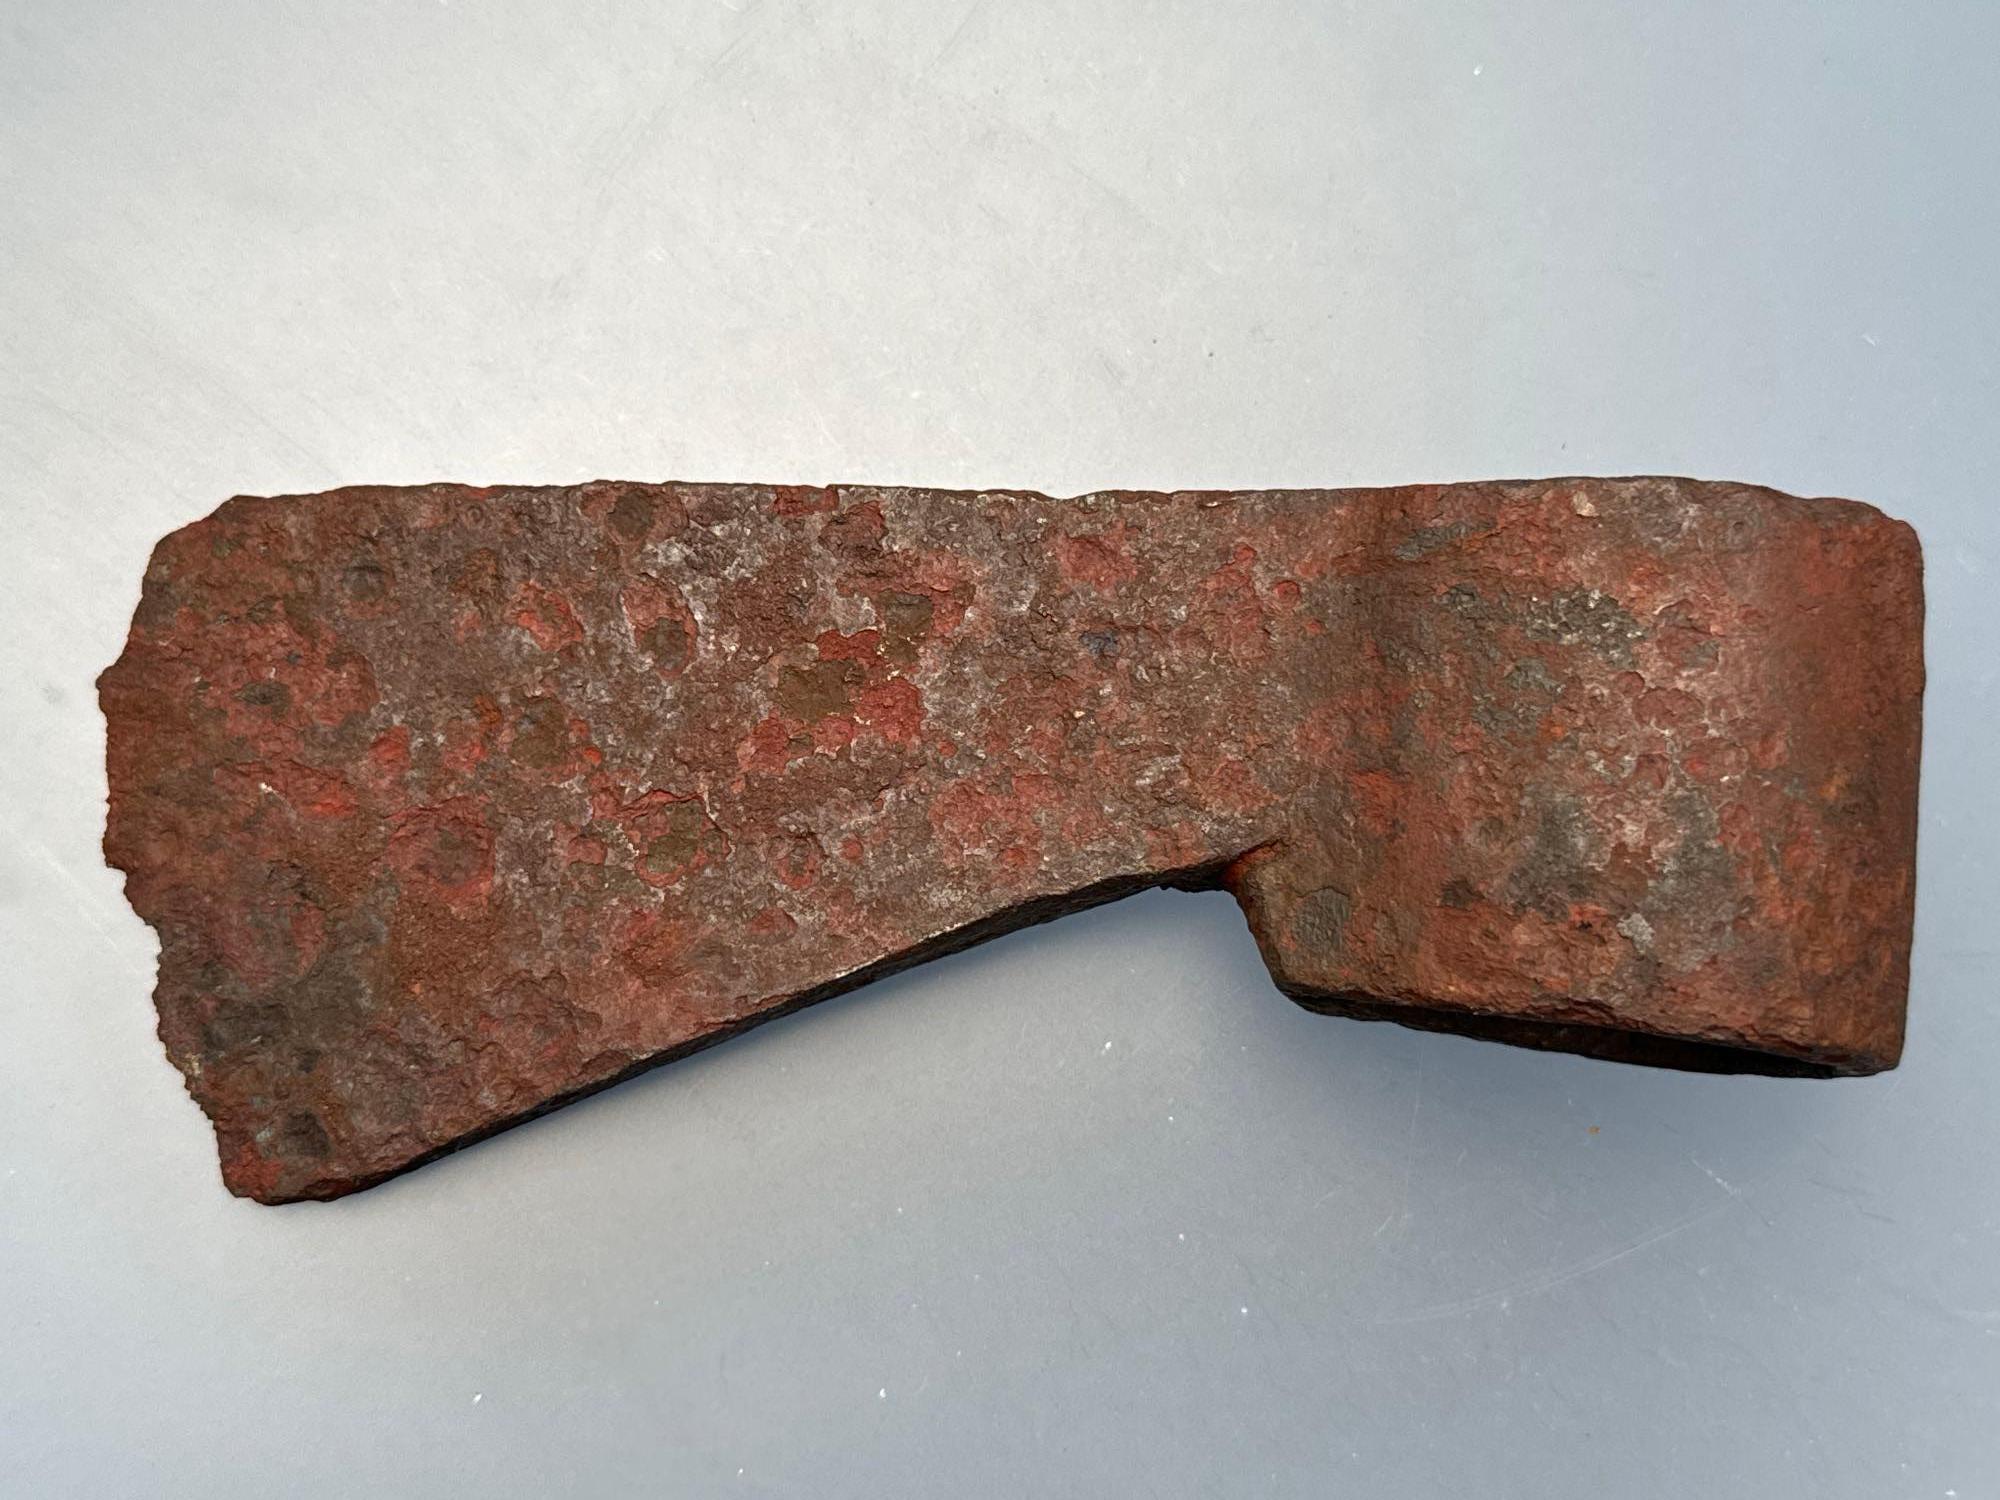 NICE French Iron Biscayne Trade Axe w/Marks, 6 1/2", Found by Ted Siri on White Springs Site (1688-1